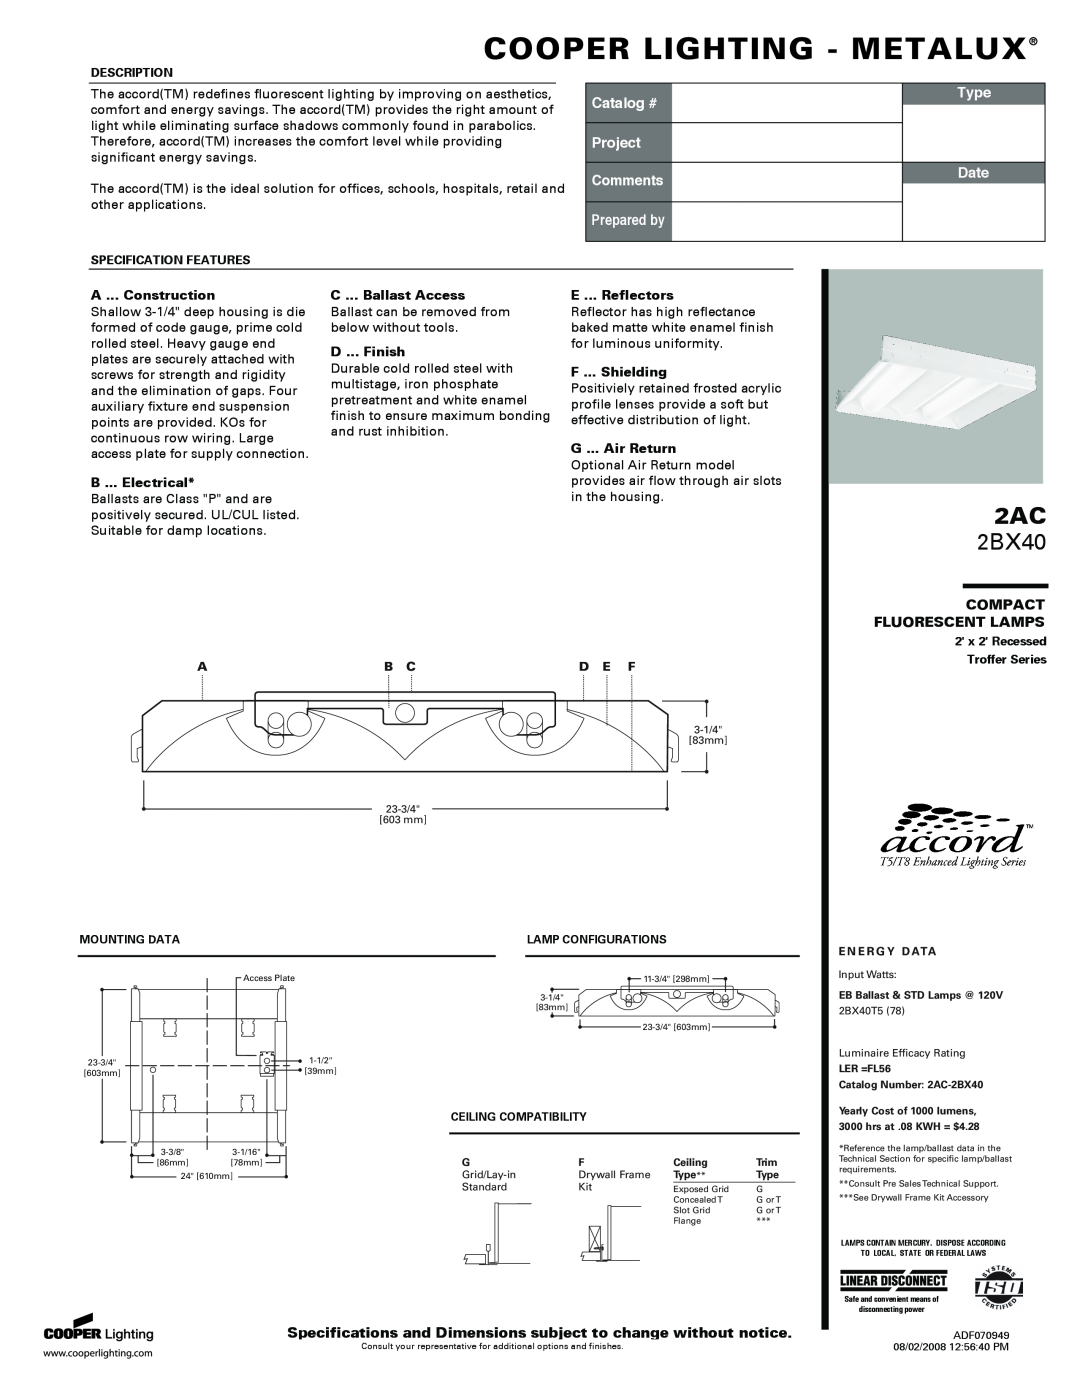 Cooper Lighting 2AC specifications Compact Fluorescent Lamps, Cooper Lighting - Metalux, 2BX40, Catalog #, Prepared by 